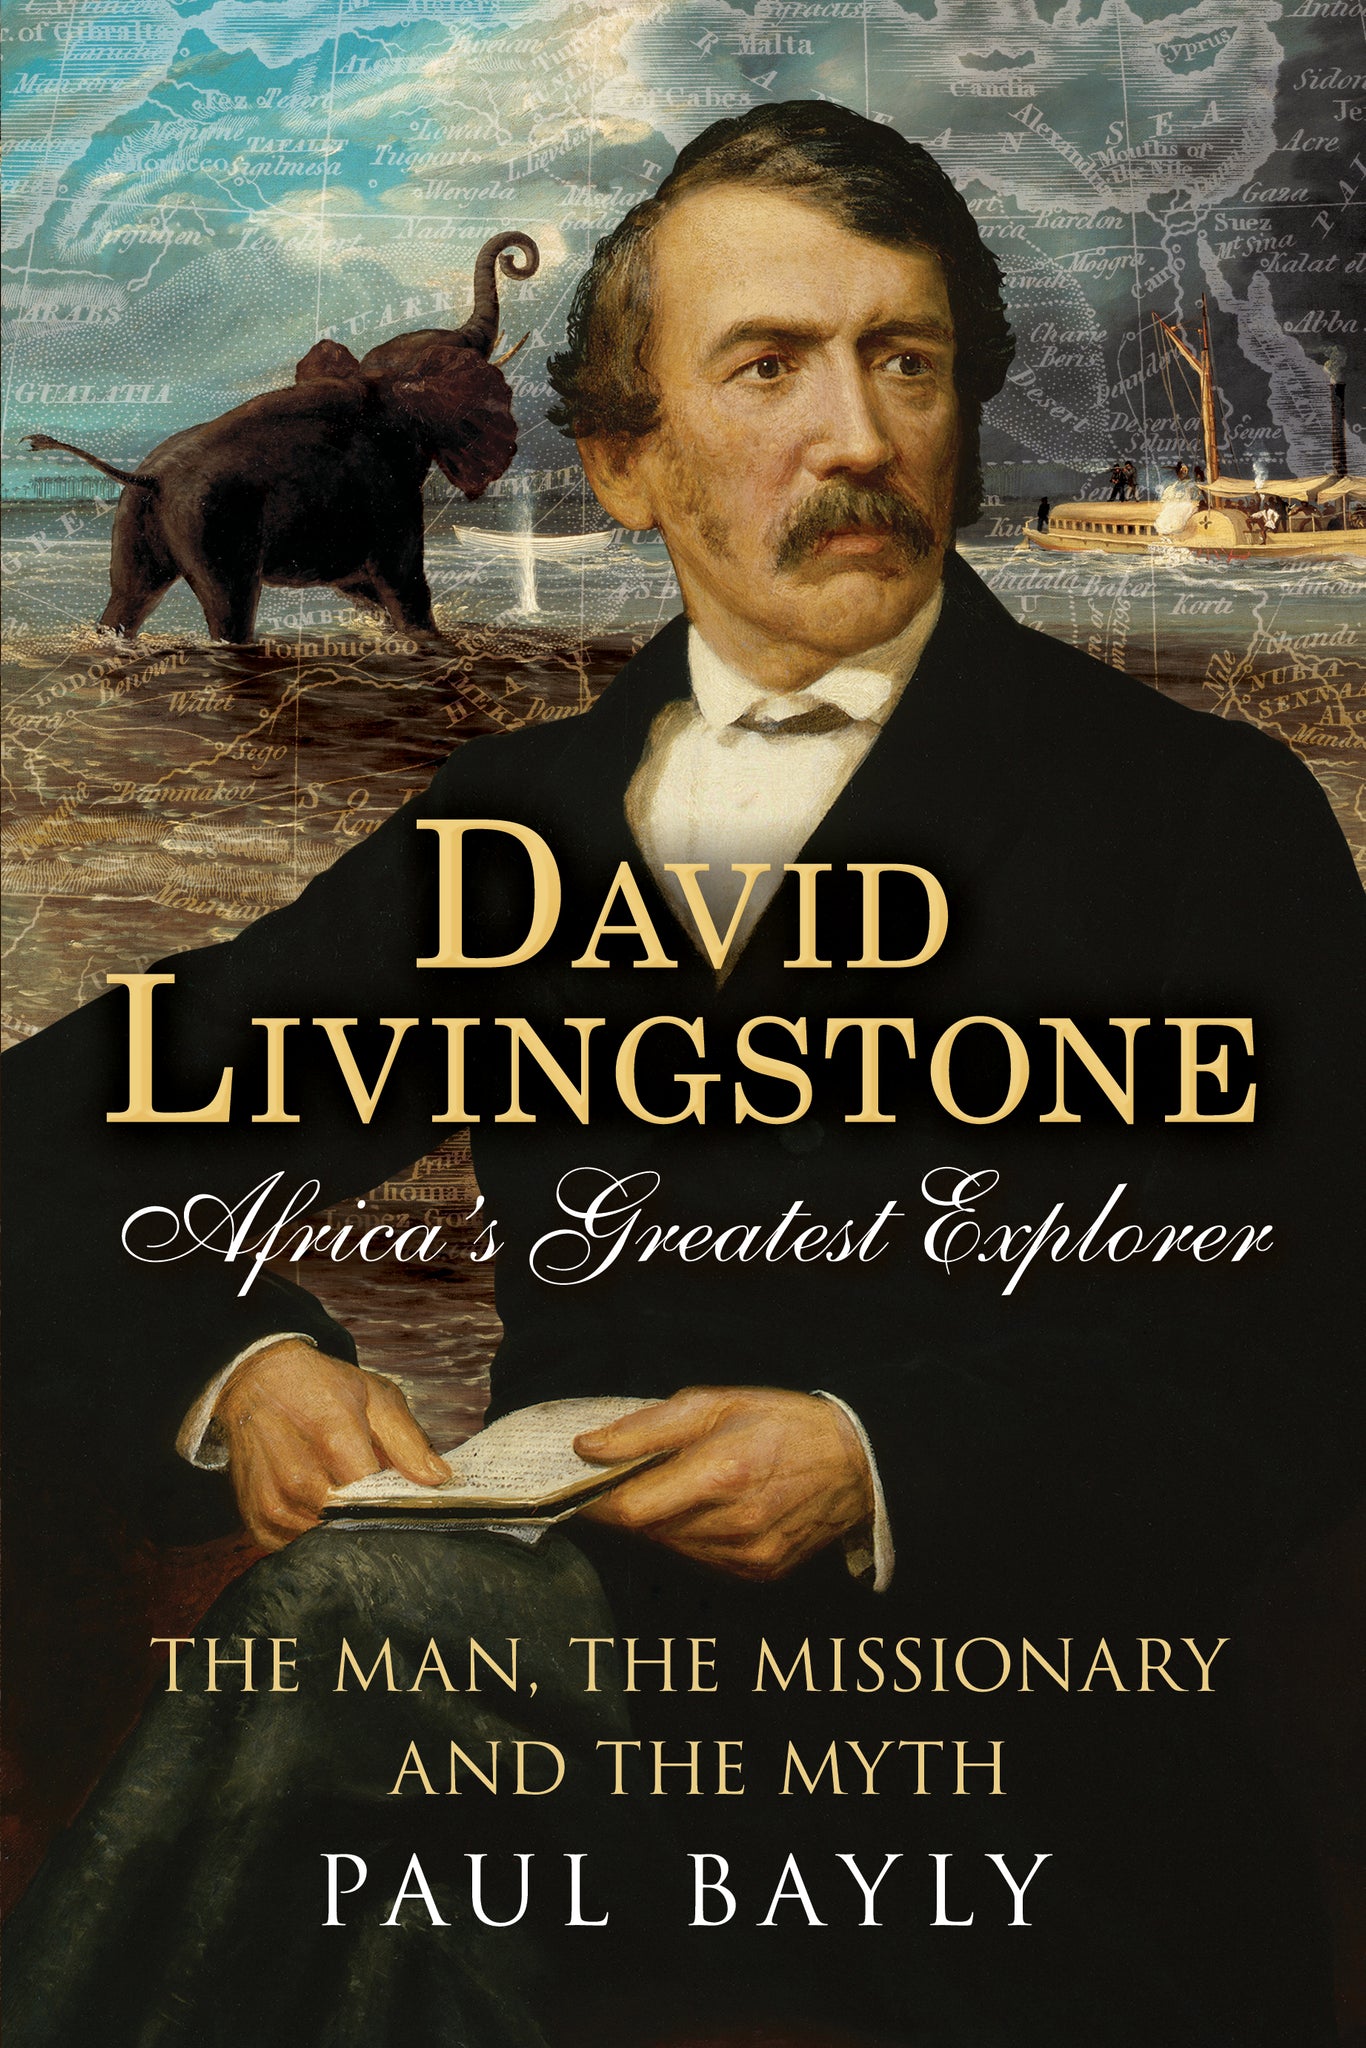 David Livingstone, Africa's Greatest Explorer - available now from Fonthill Media